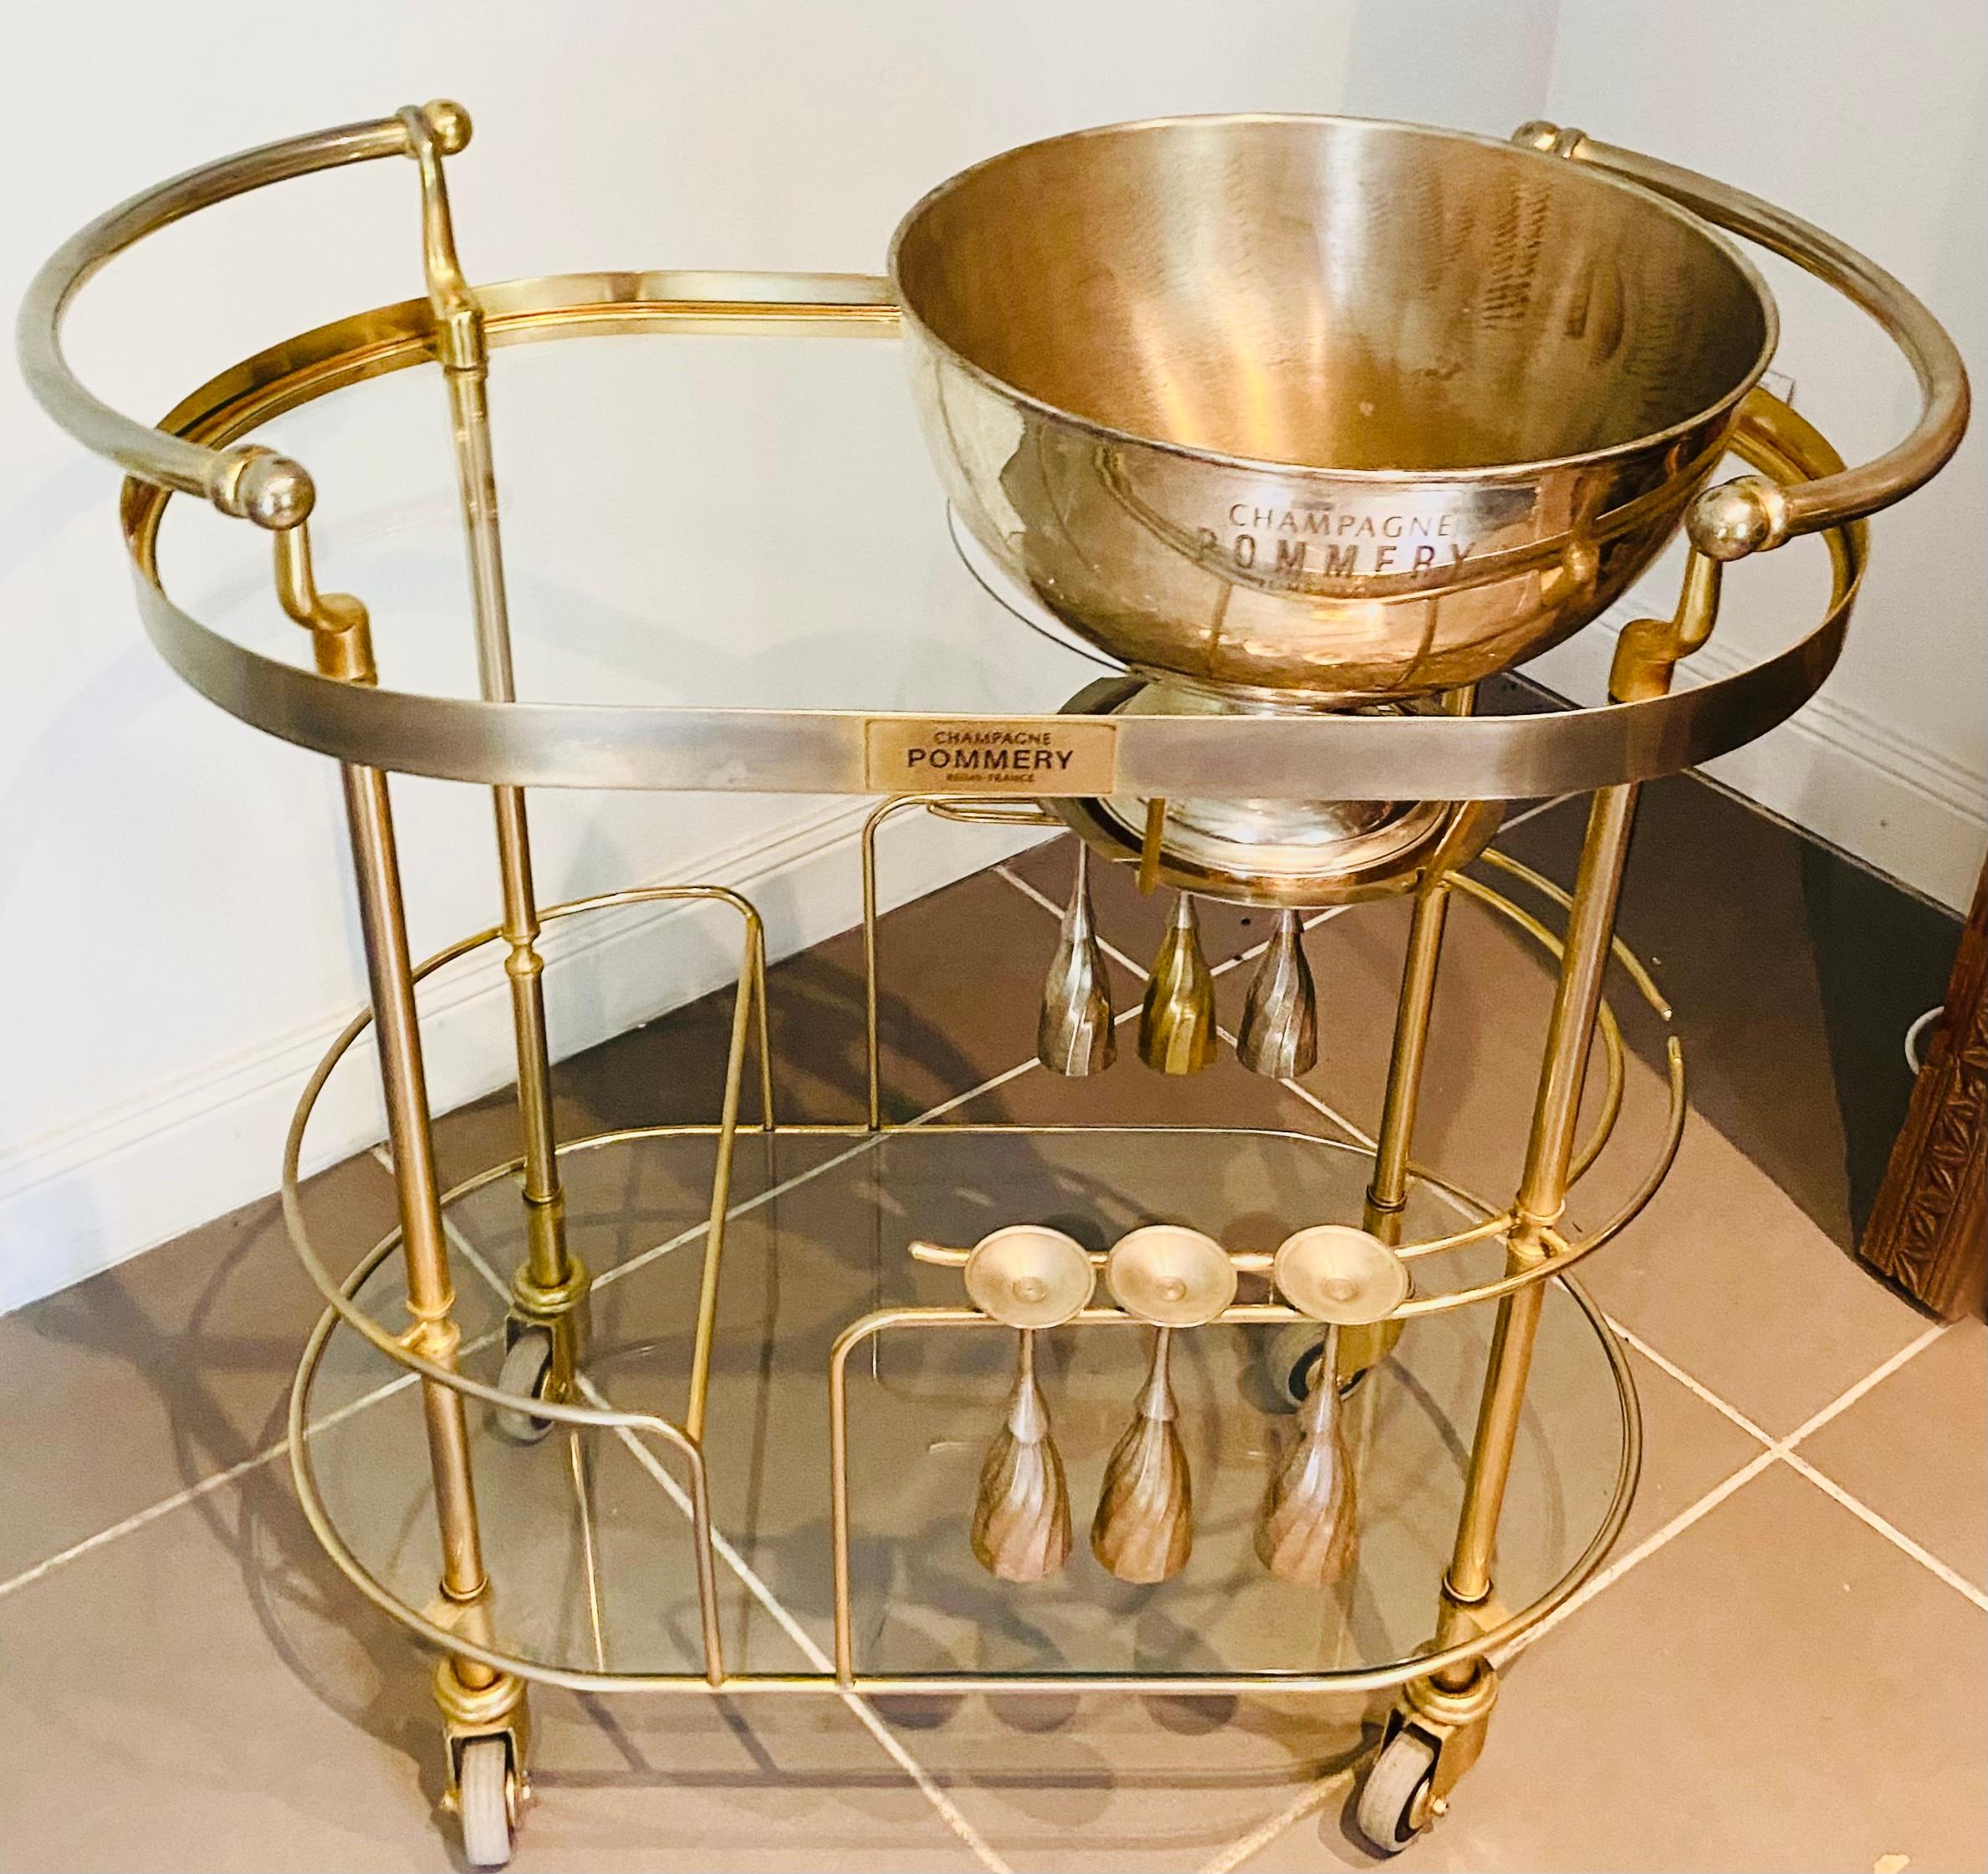 Beautiful and rare Art Deco champagne trolley or bar cart with a curved two-tier frame in chromed brass and glass - Pommery
The upper level has a bowl, champagne bucket, ice bucket, wine cooler for ice in Silver Metal.
The second level has its six